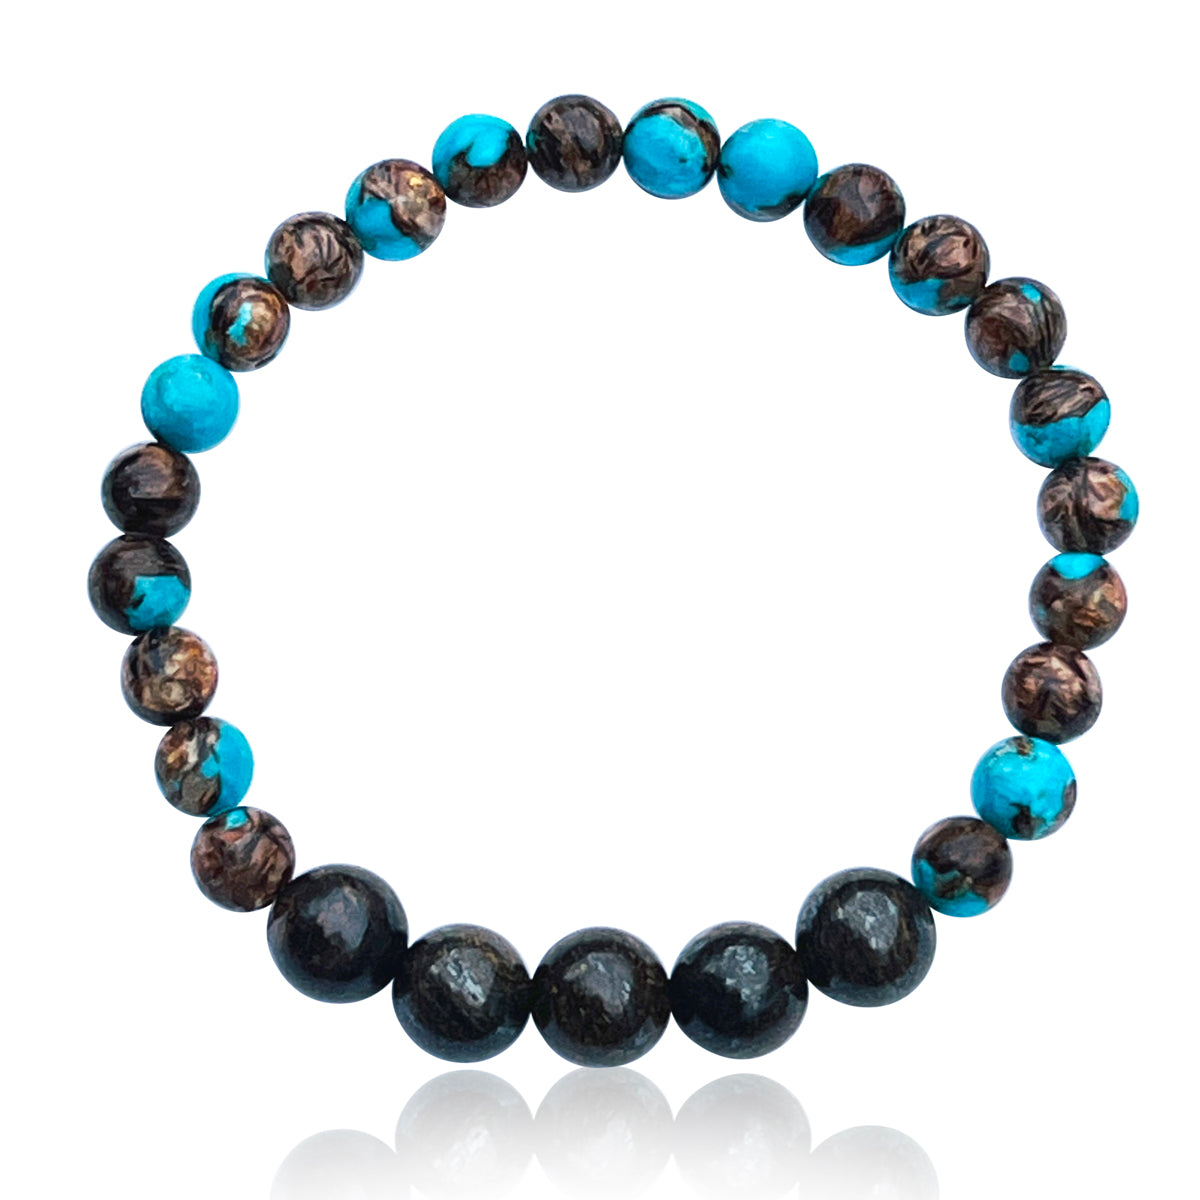  The "Peaceful Pathfinder" bracelet, a harmonious fusion of Bronzite and Turquoise, thoughtfully crafted to resonate with your inner journey.